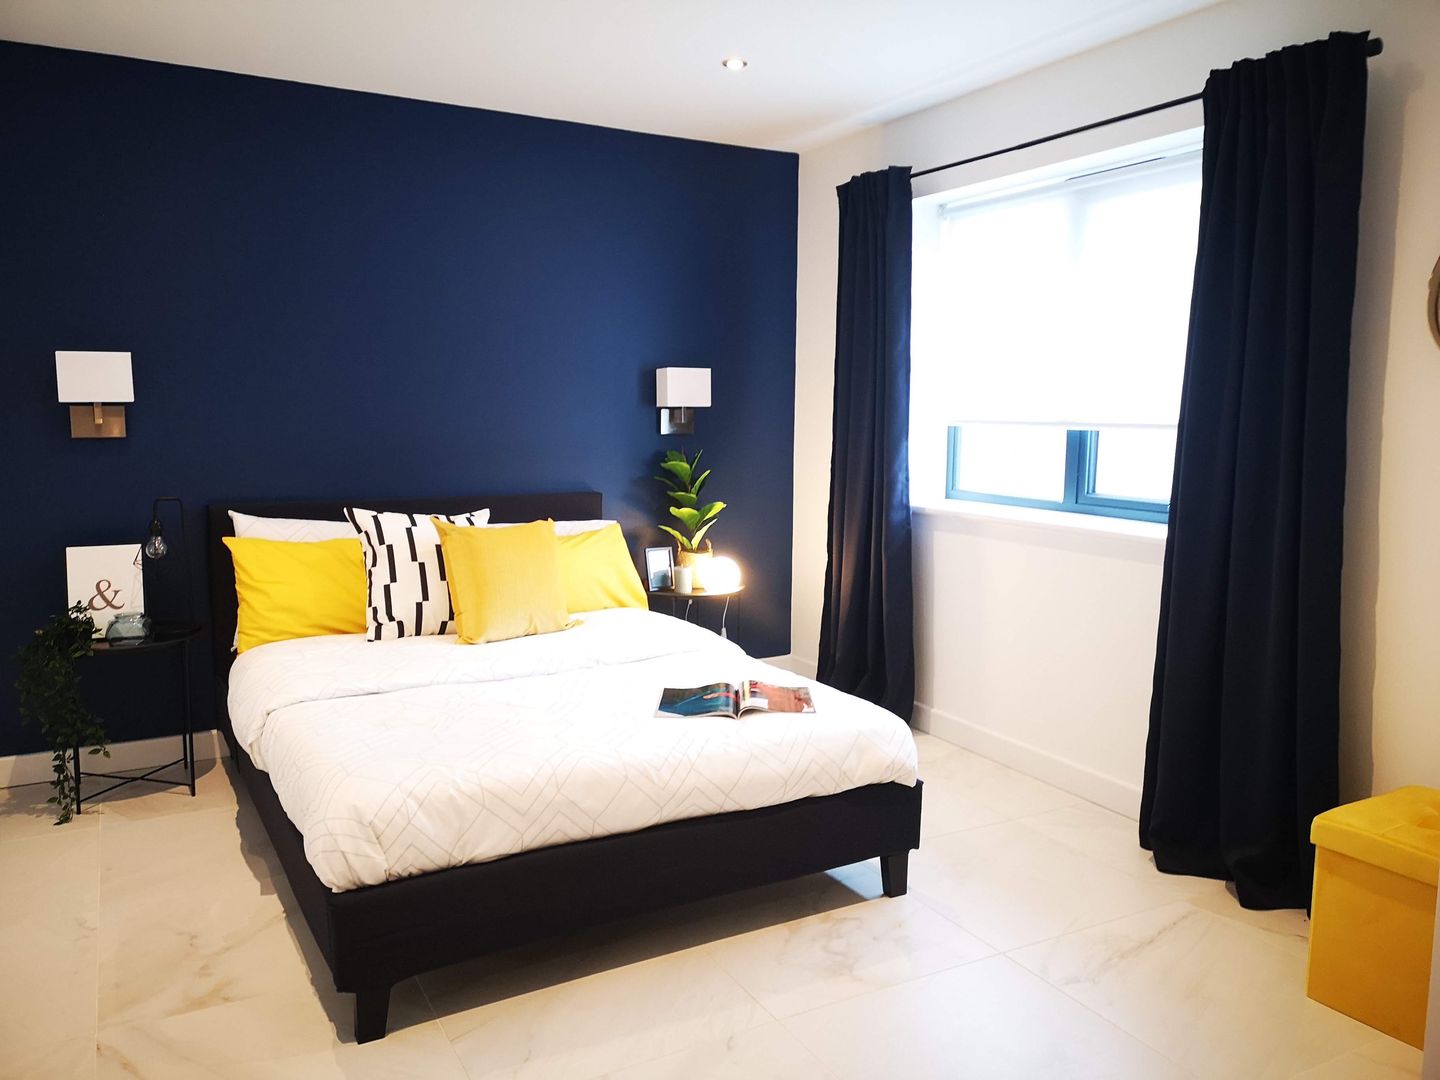 Contrasting navy bedroom THE FRESH INTERIOR COMPANY غرف نوم صغيرة رخام Dulux sapphire salute mustard accessories Ikea curtains marble tiled floor